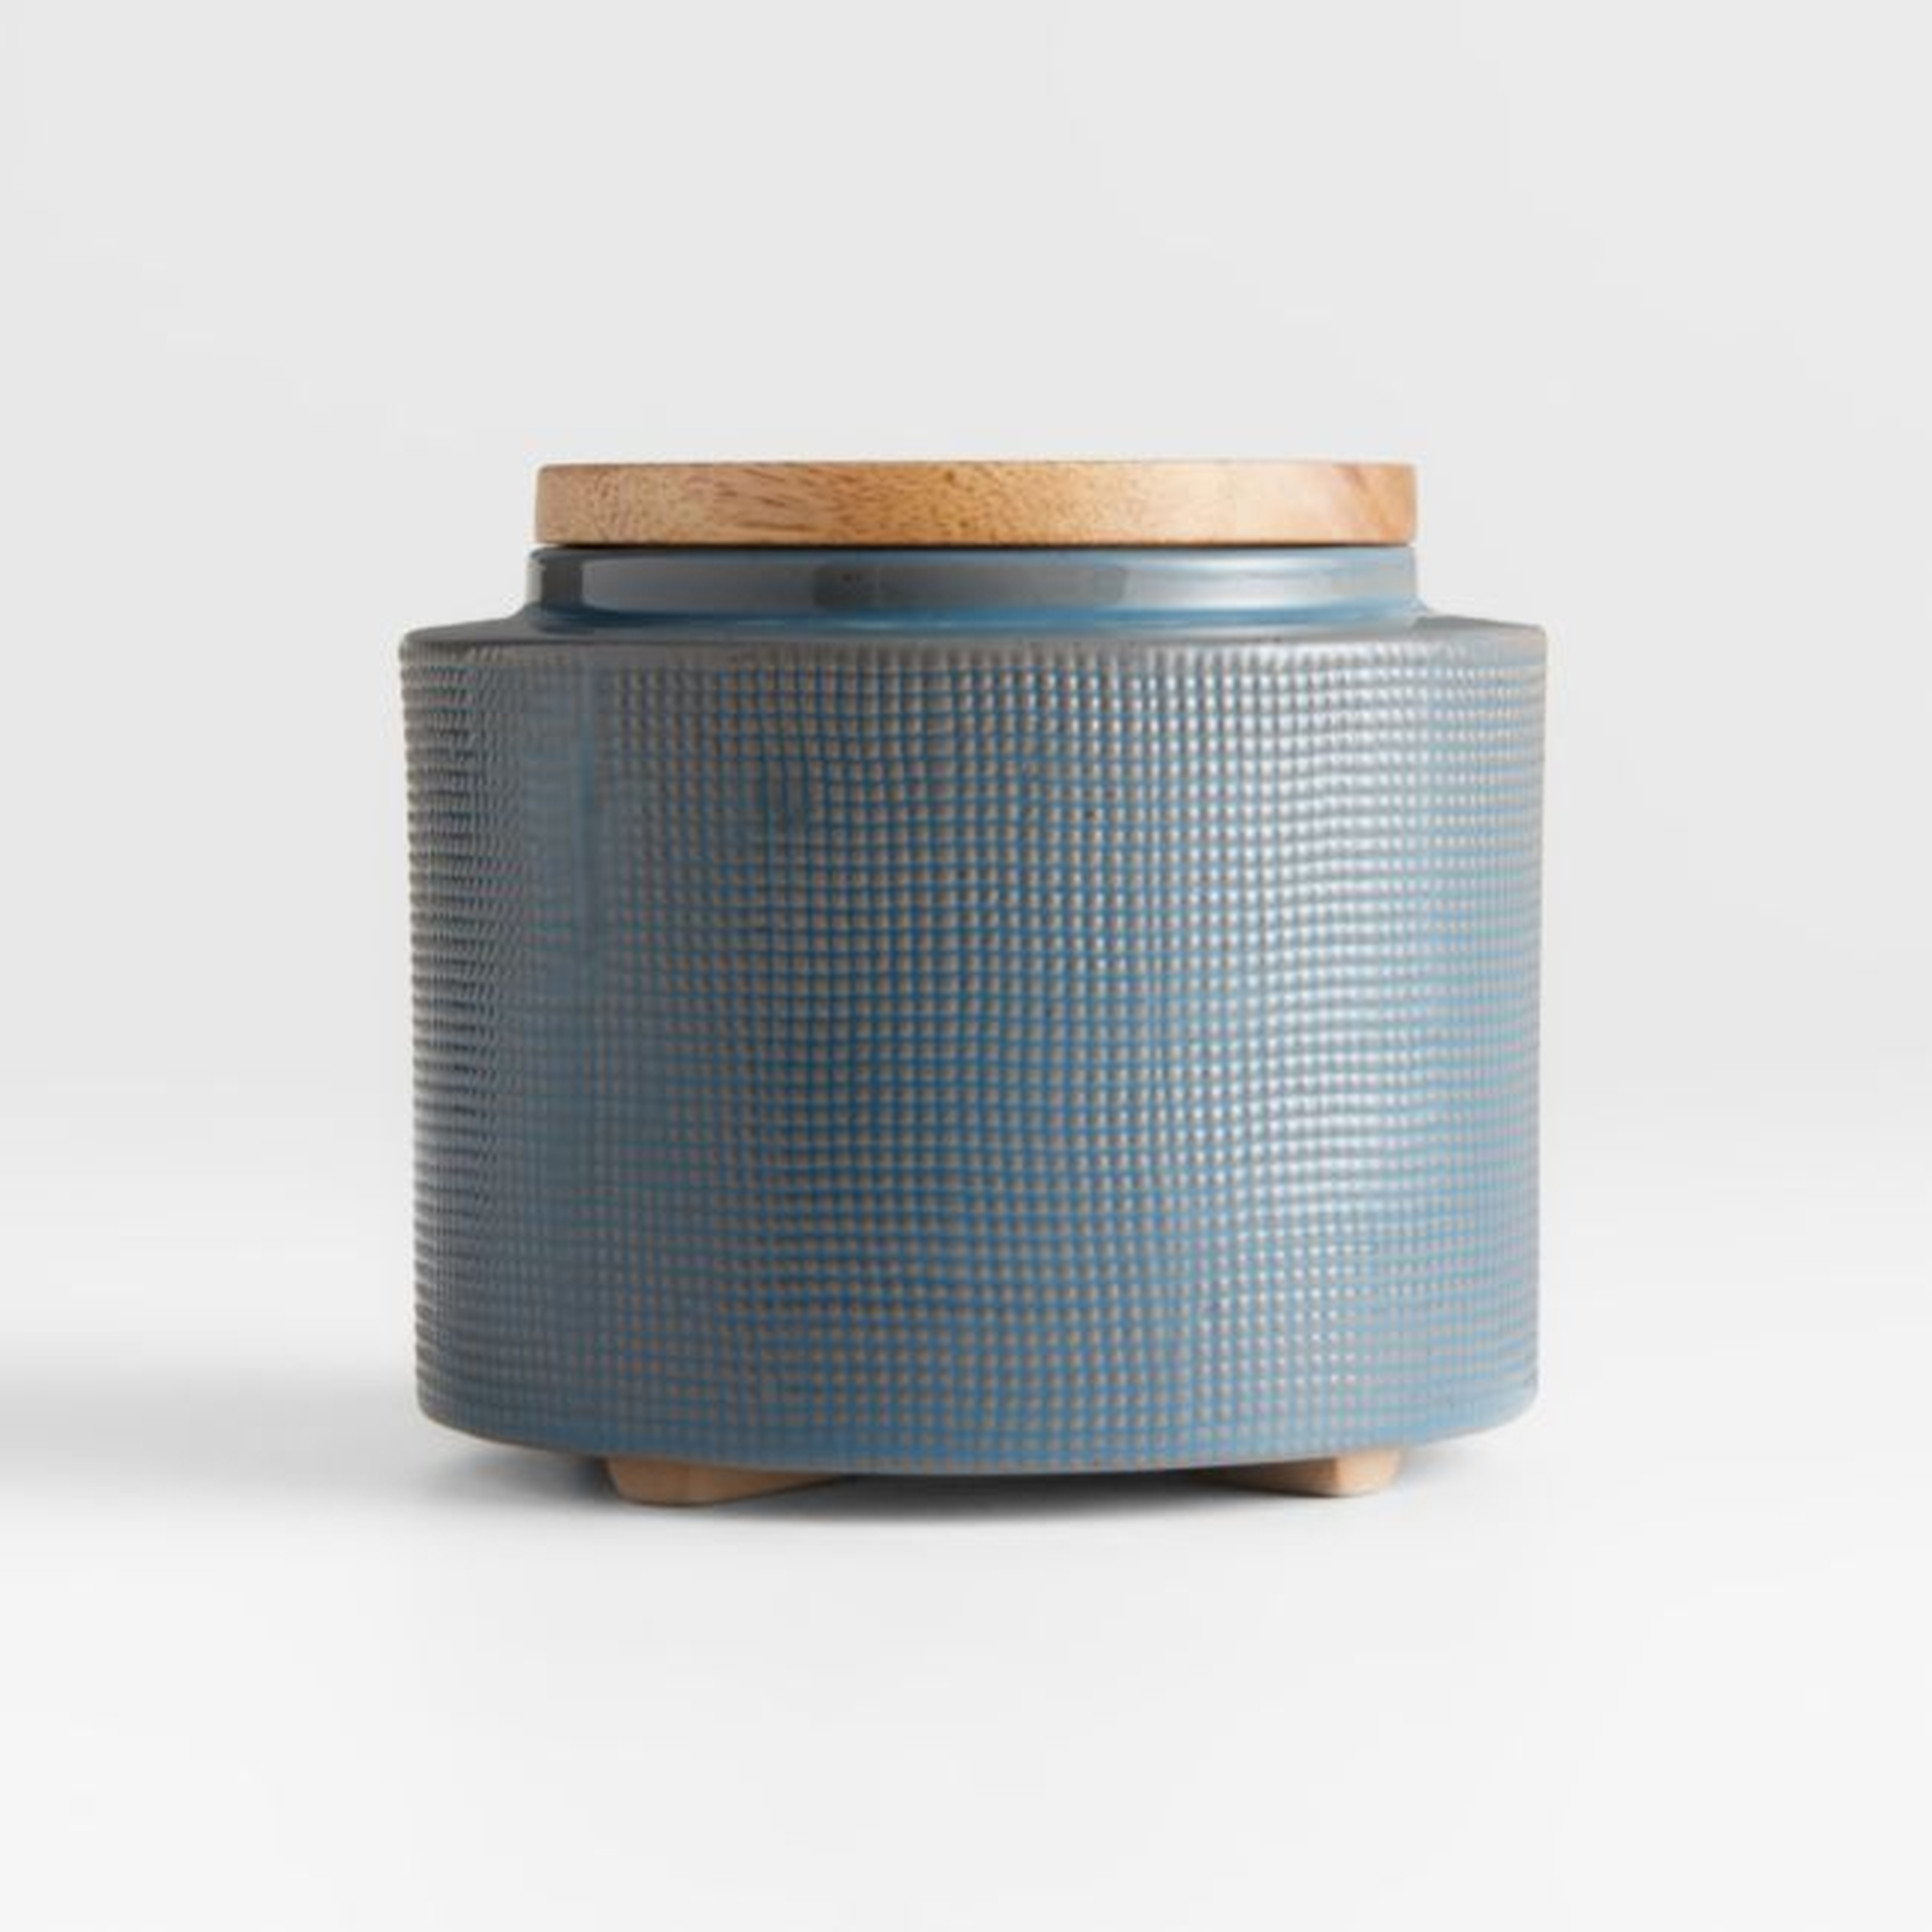 Ena Small Ceramic Canister with Wood Lid - Crate and Barrel